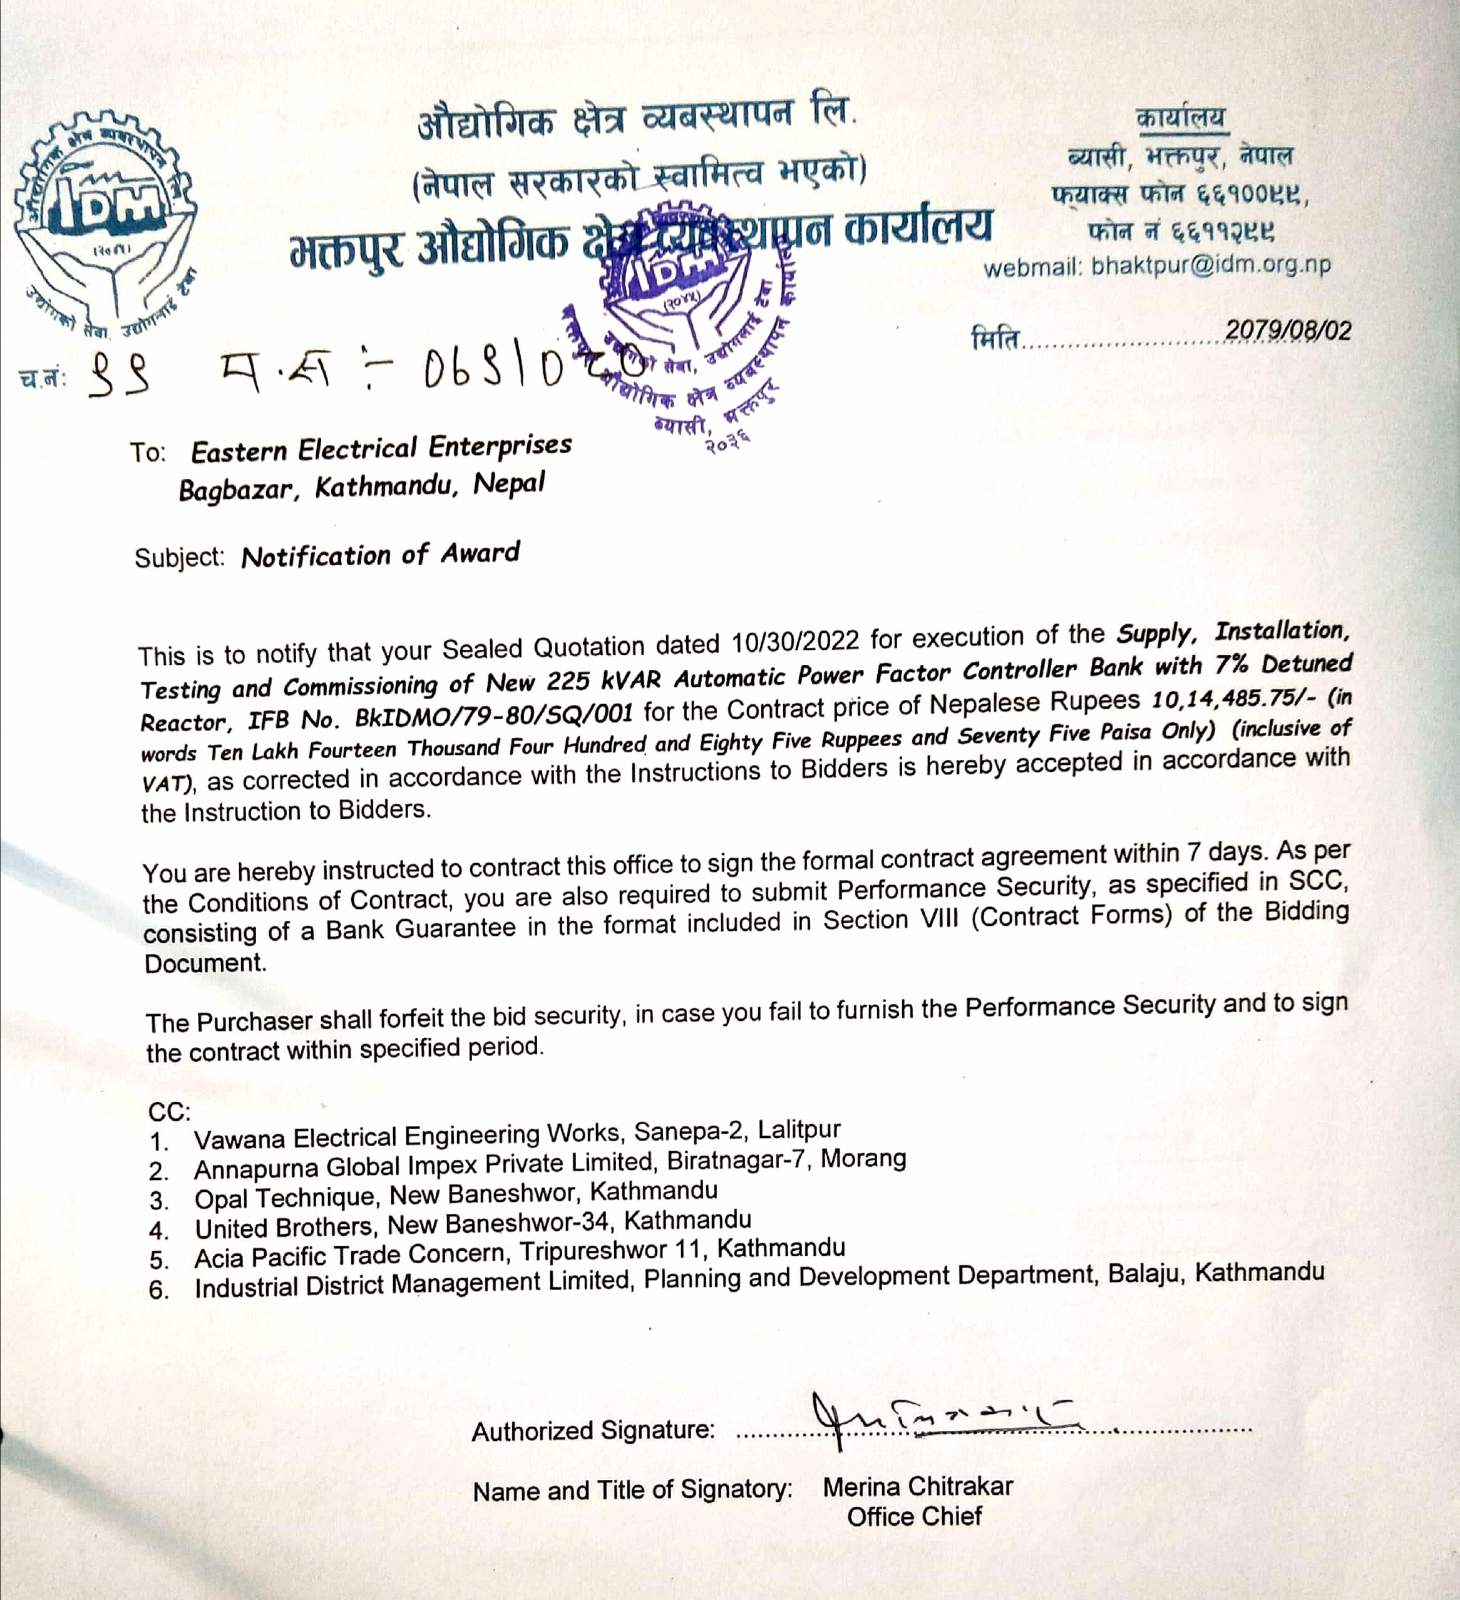 Notification of Award of Bhaktpur Industrial District Management Office Publish Date 2079/08/02